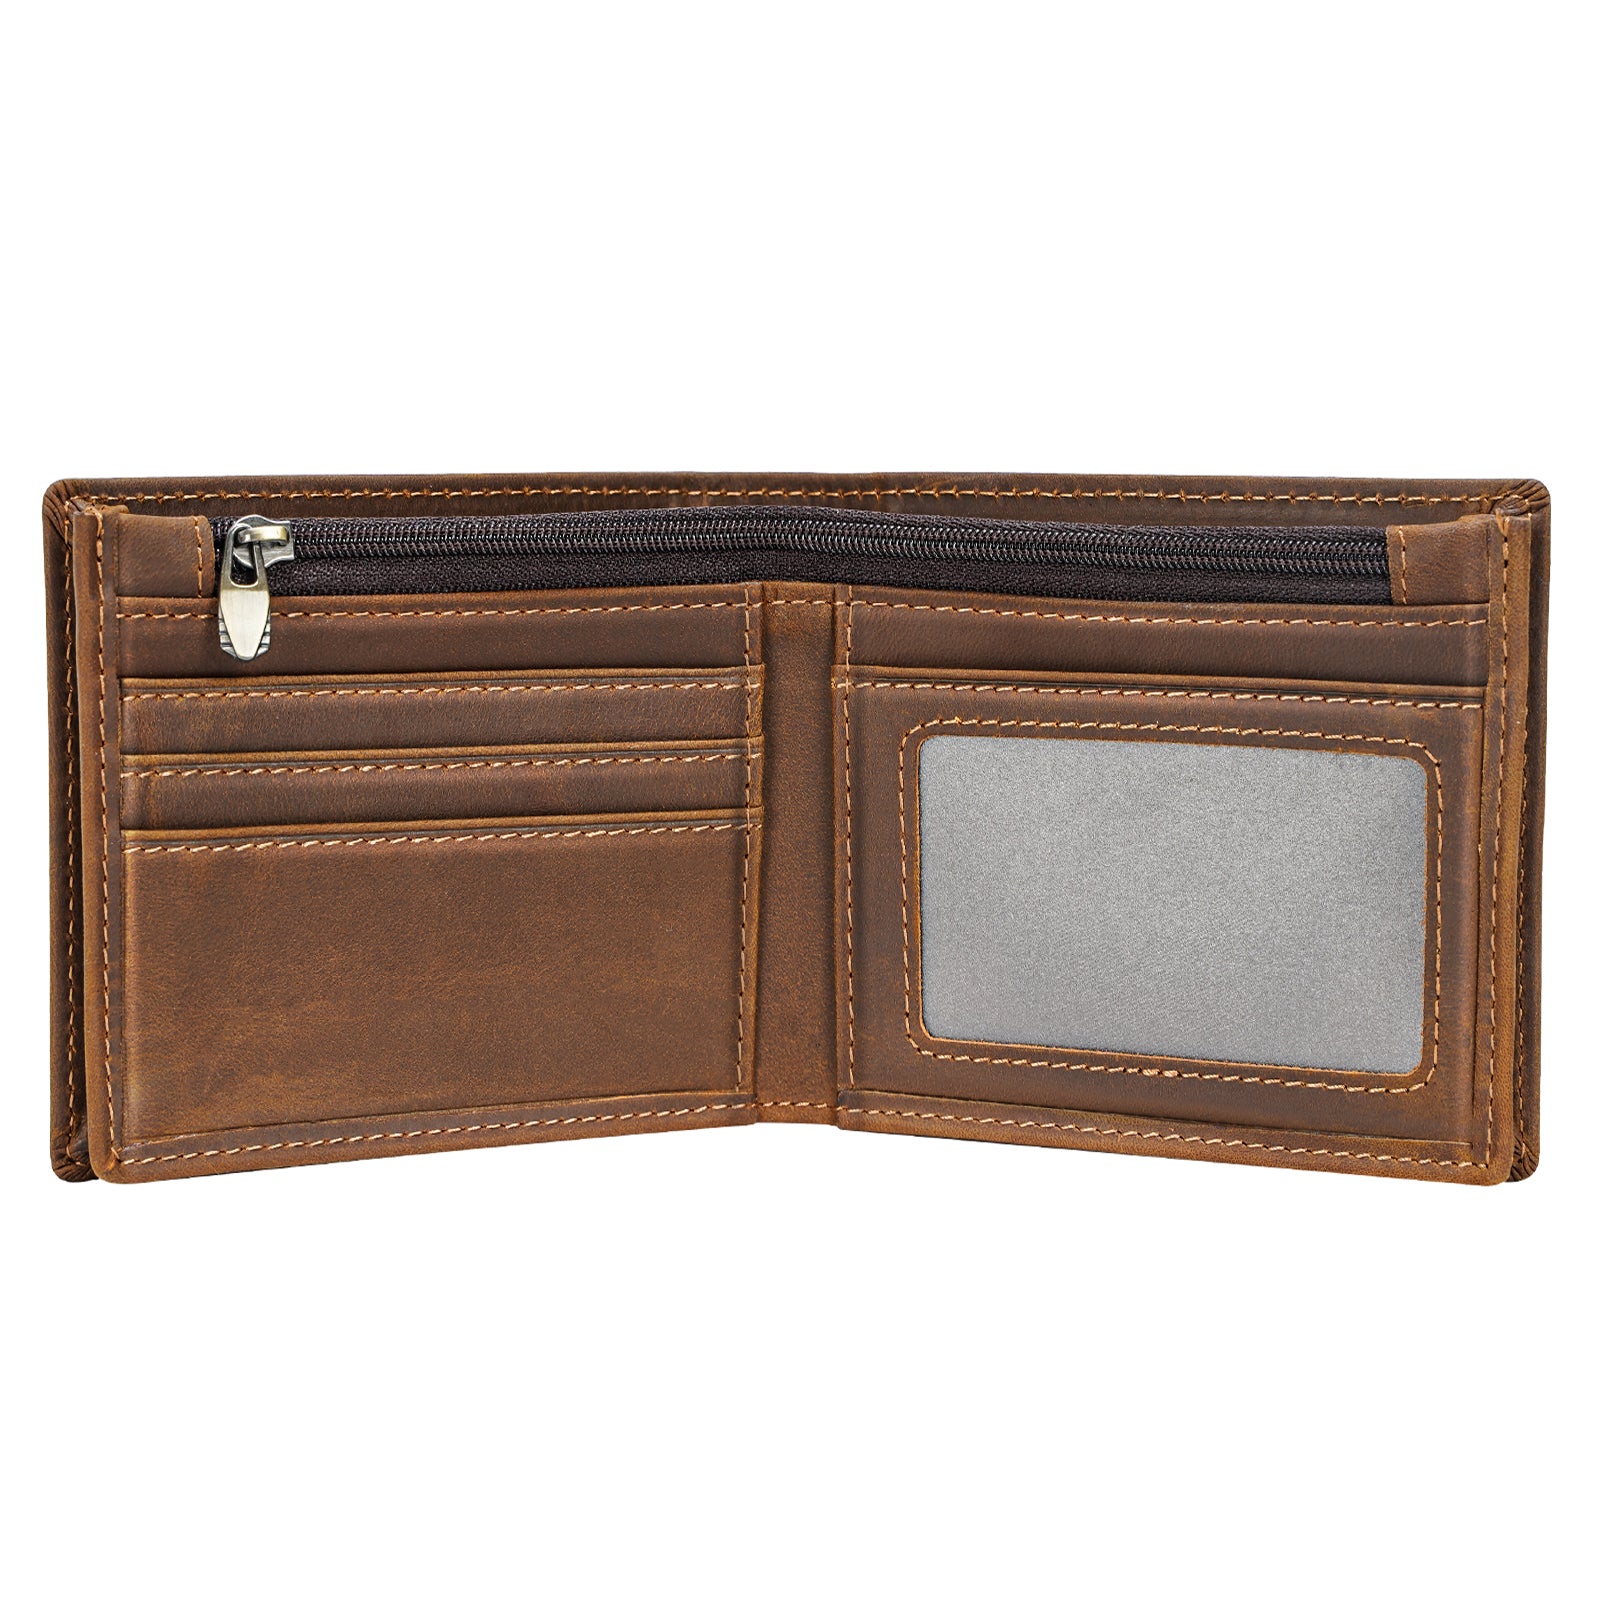 Buy Polare Men's Cowboy Genuine Natural Crazy Horse Leather Bifold Wallet  (Small) at